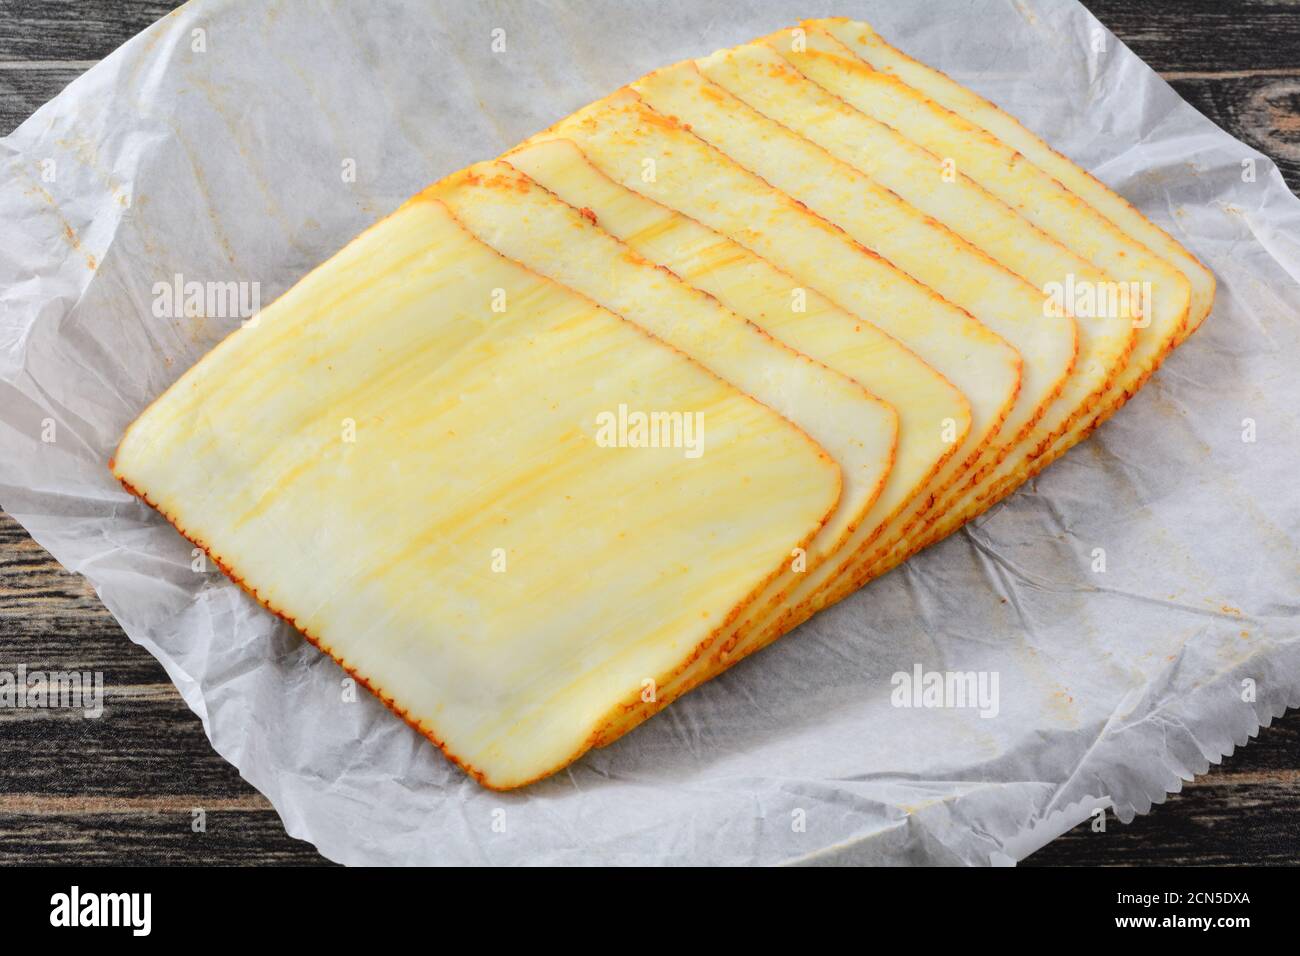 Stack of muenster cheese slices on white paper butcher paper Stock Photo